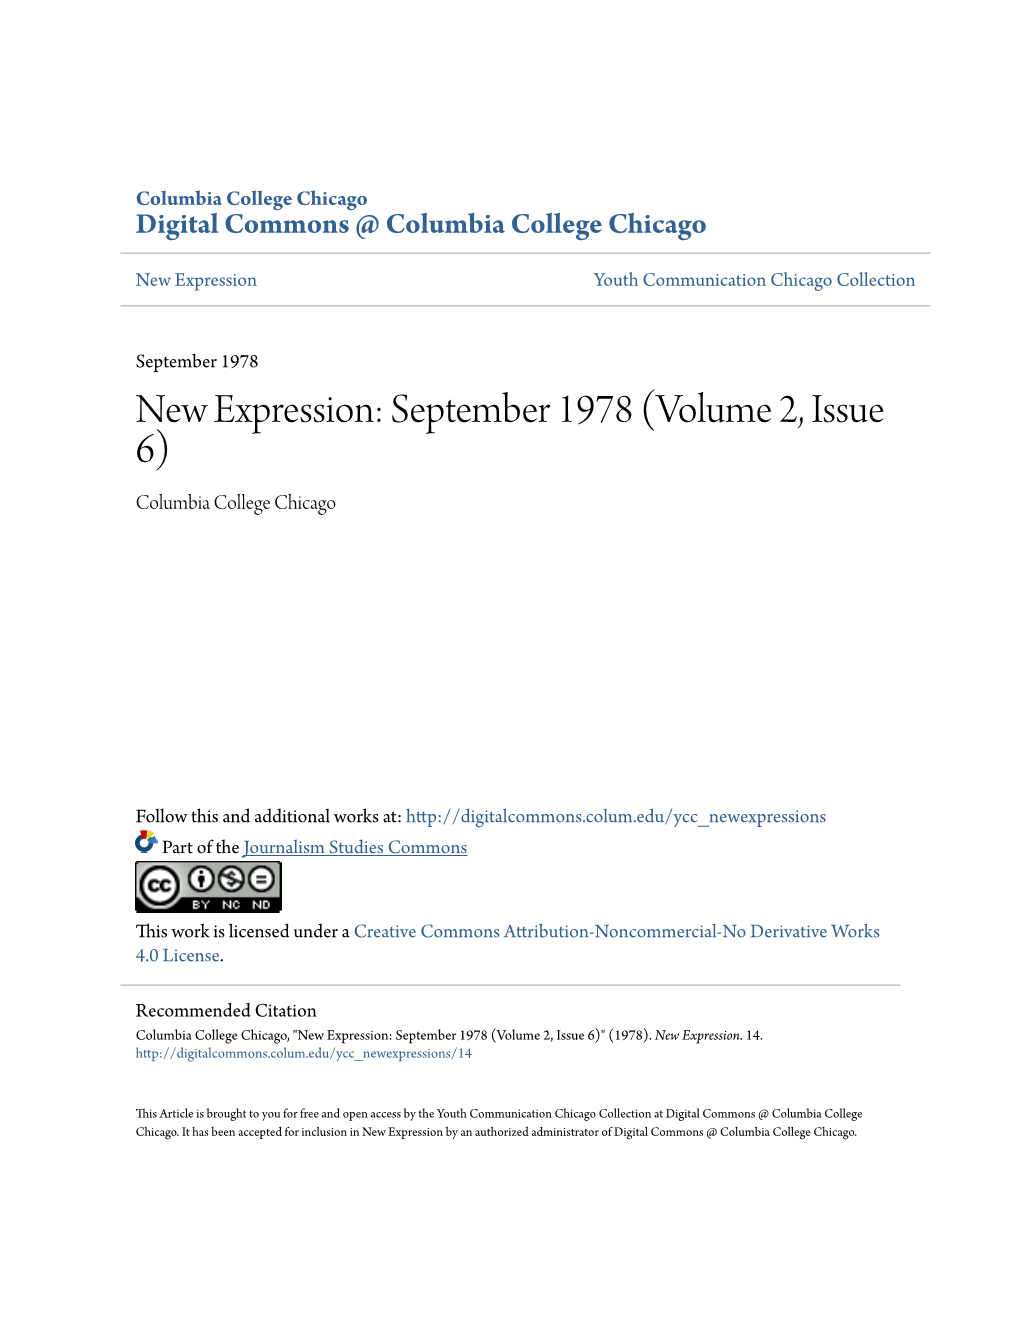 New Expression: September 1978 (Volume 2, Issue 6) Columbia College Chicago